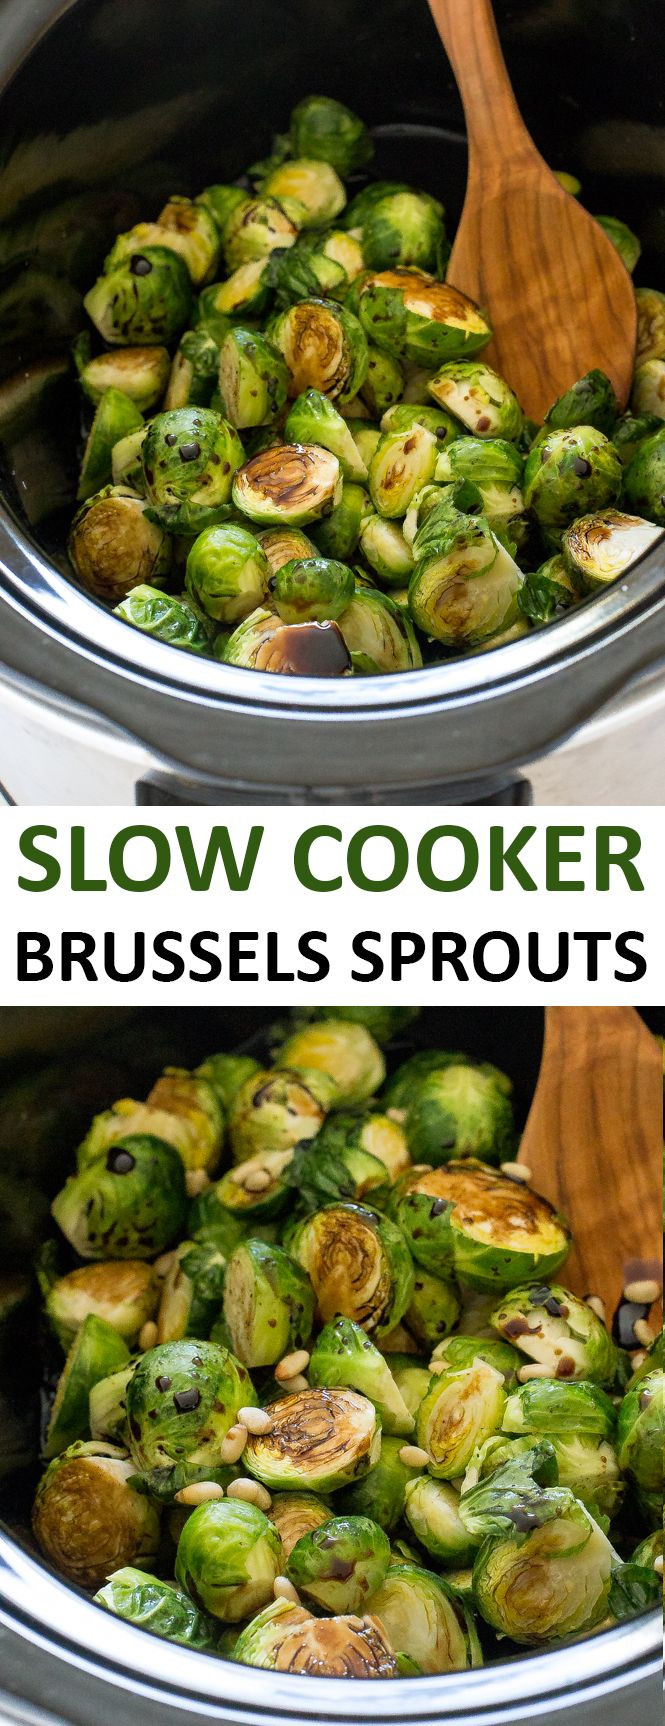 Crockpot Side Dishes For Thanksgiving
 Slow Cooker Balsamic Brussels Sprouts Recipe